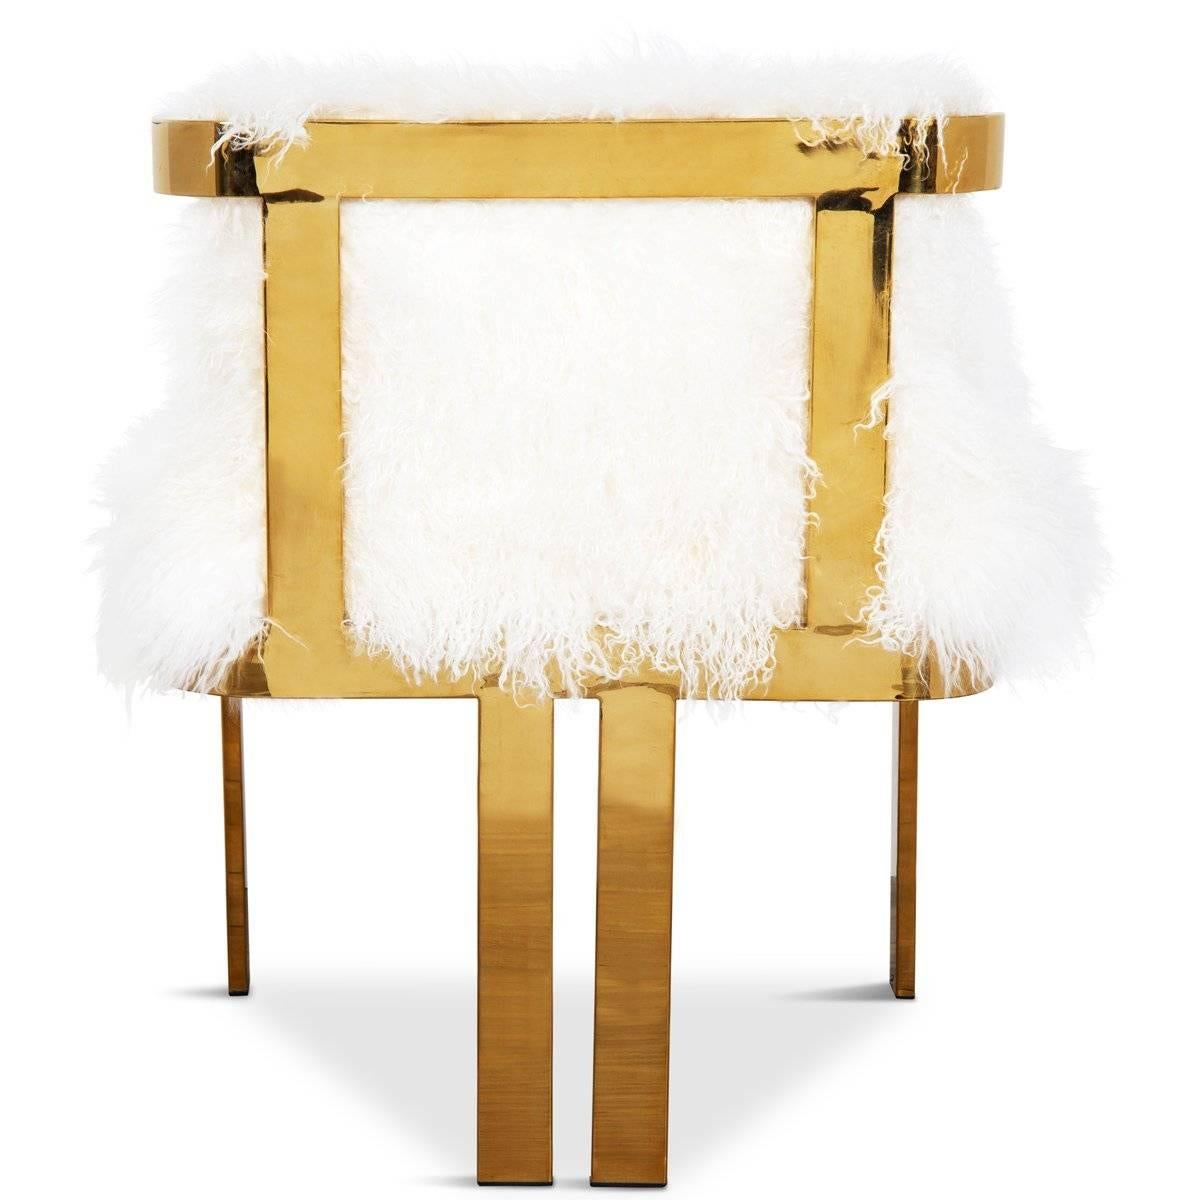 Introducing our all new Kingpin dining chair in Mongolian fur. With a unique brass frame and an upholstered seat and backrest, you'll surely feel like a kingpin sitting in this one-of-a-kind chair. Shown in ivory Mongolian fur.

Dimensions:
21